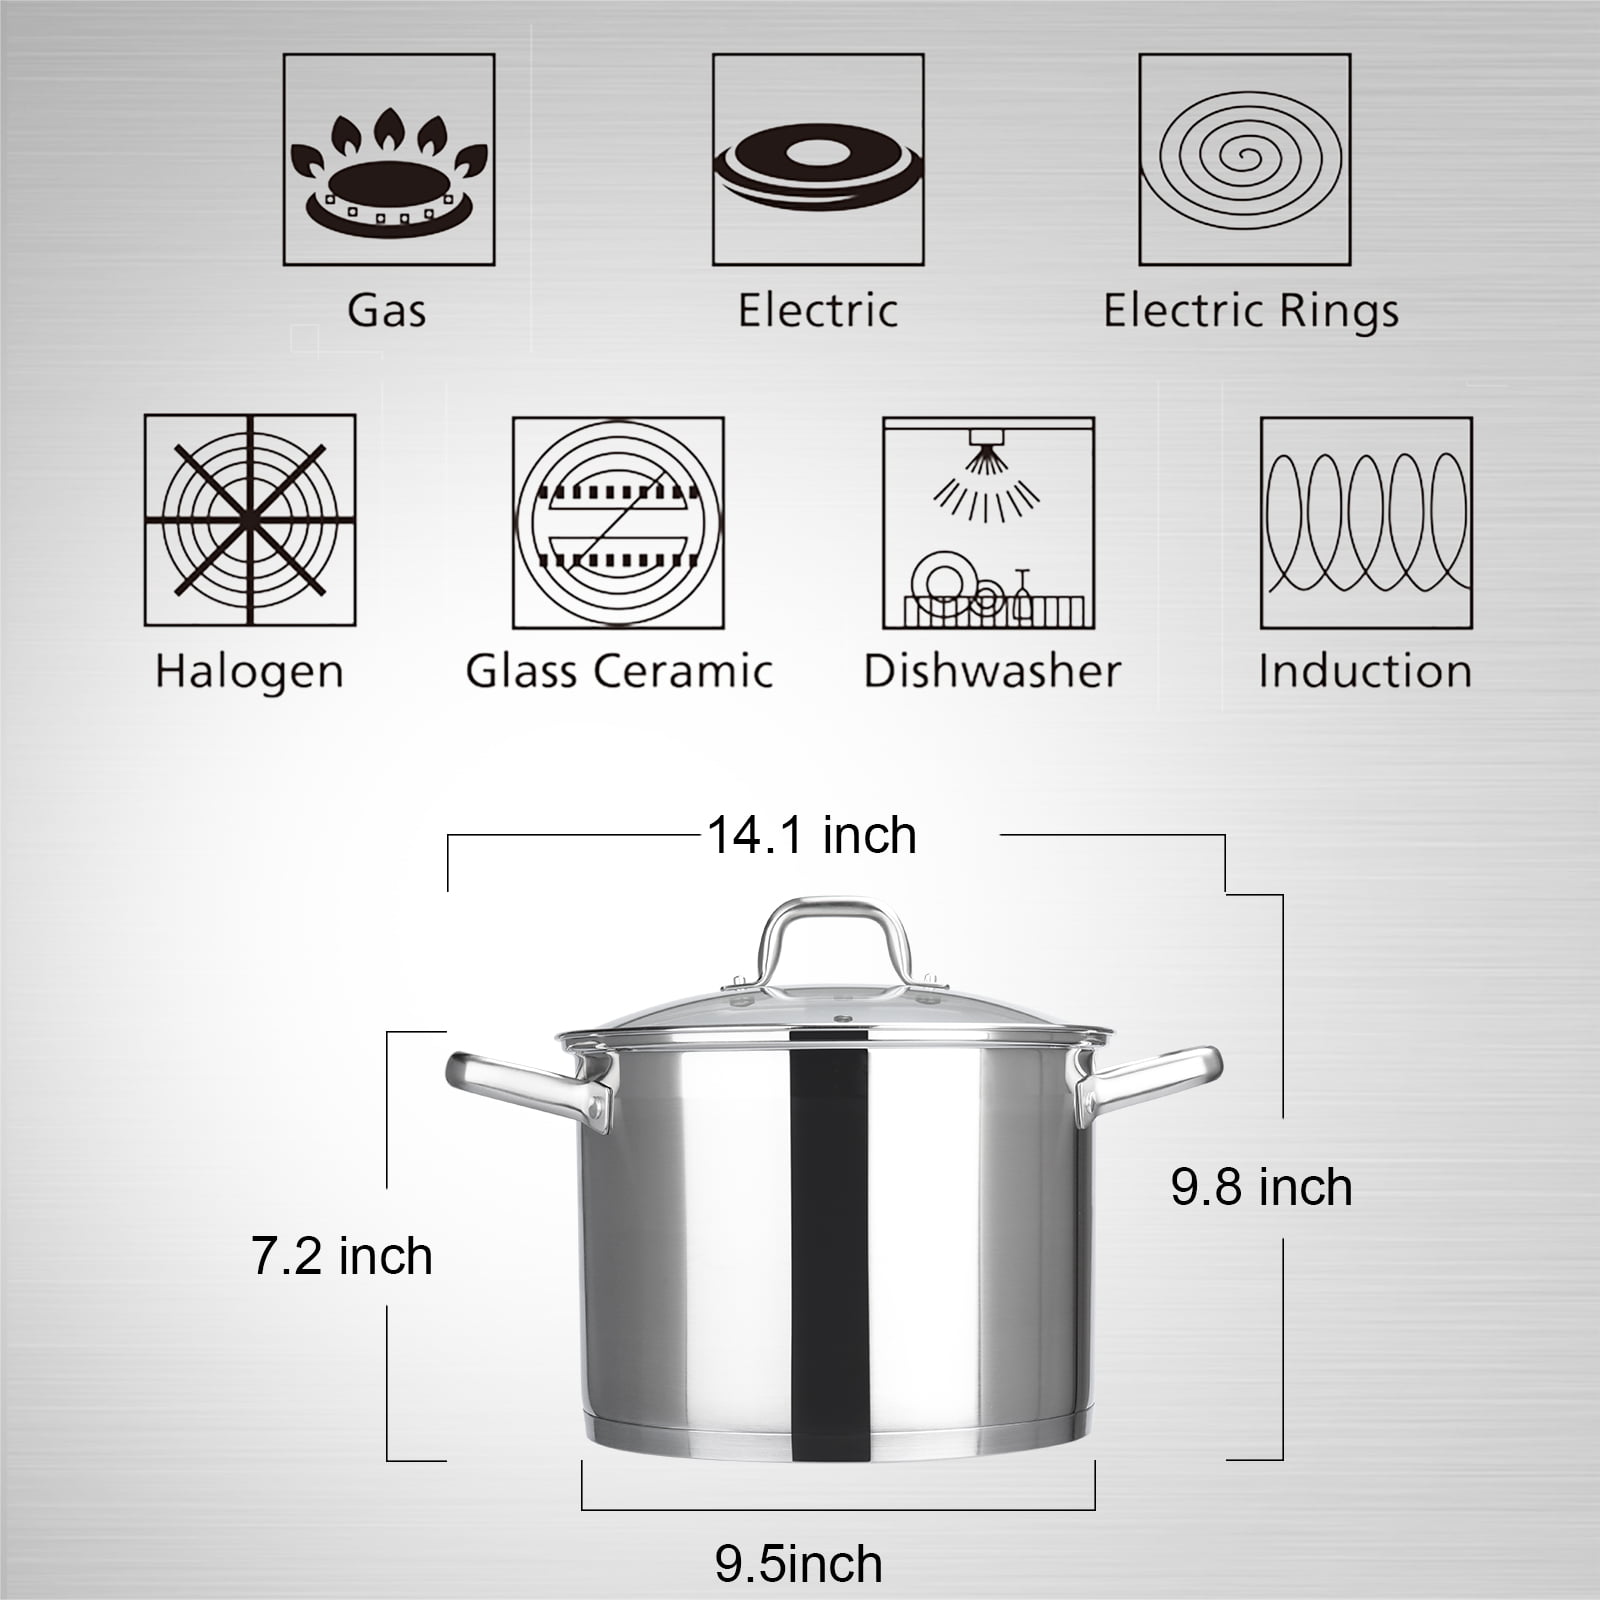 Duxtop SSIB Stainless Steel Induction Cookware Set, Impact-bonded Technology 19